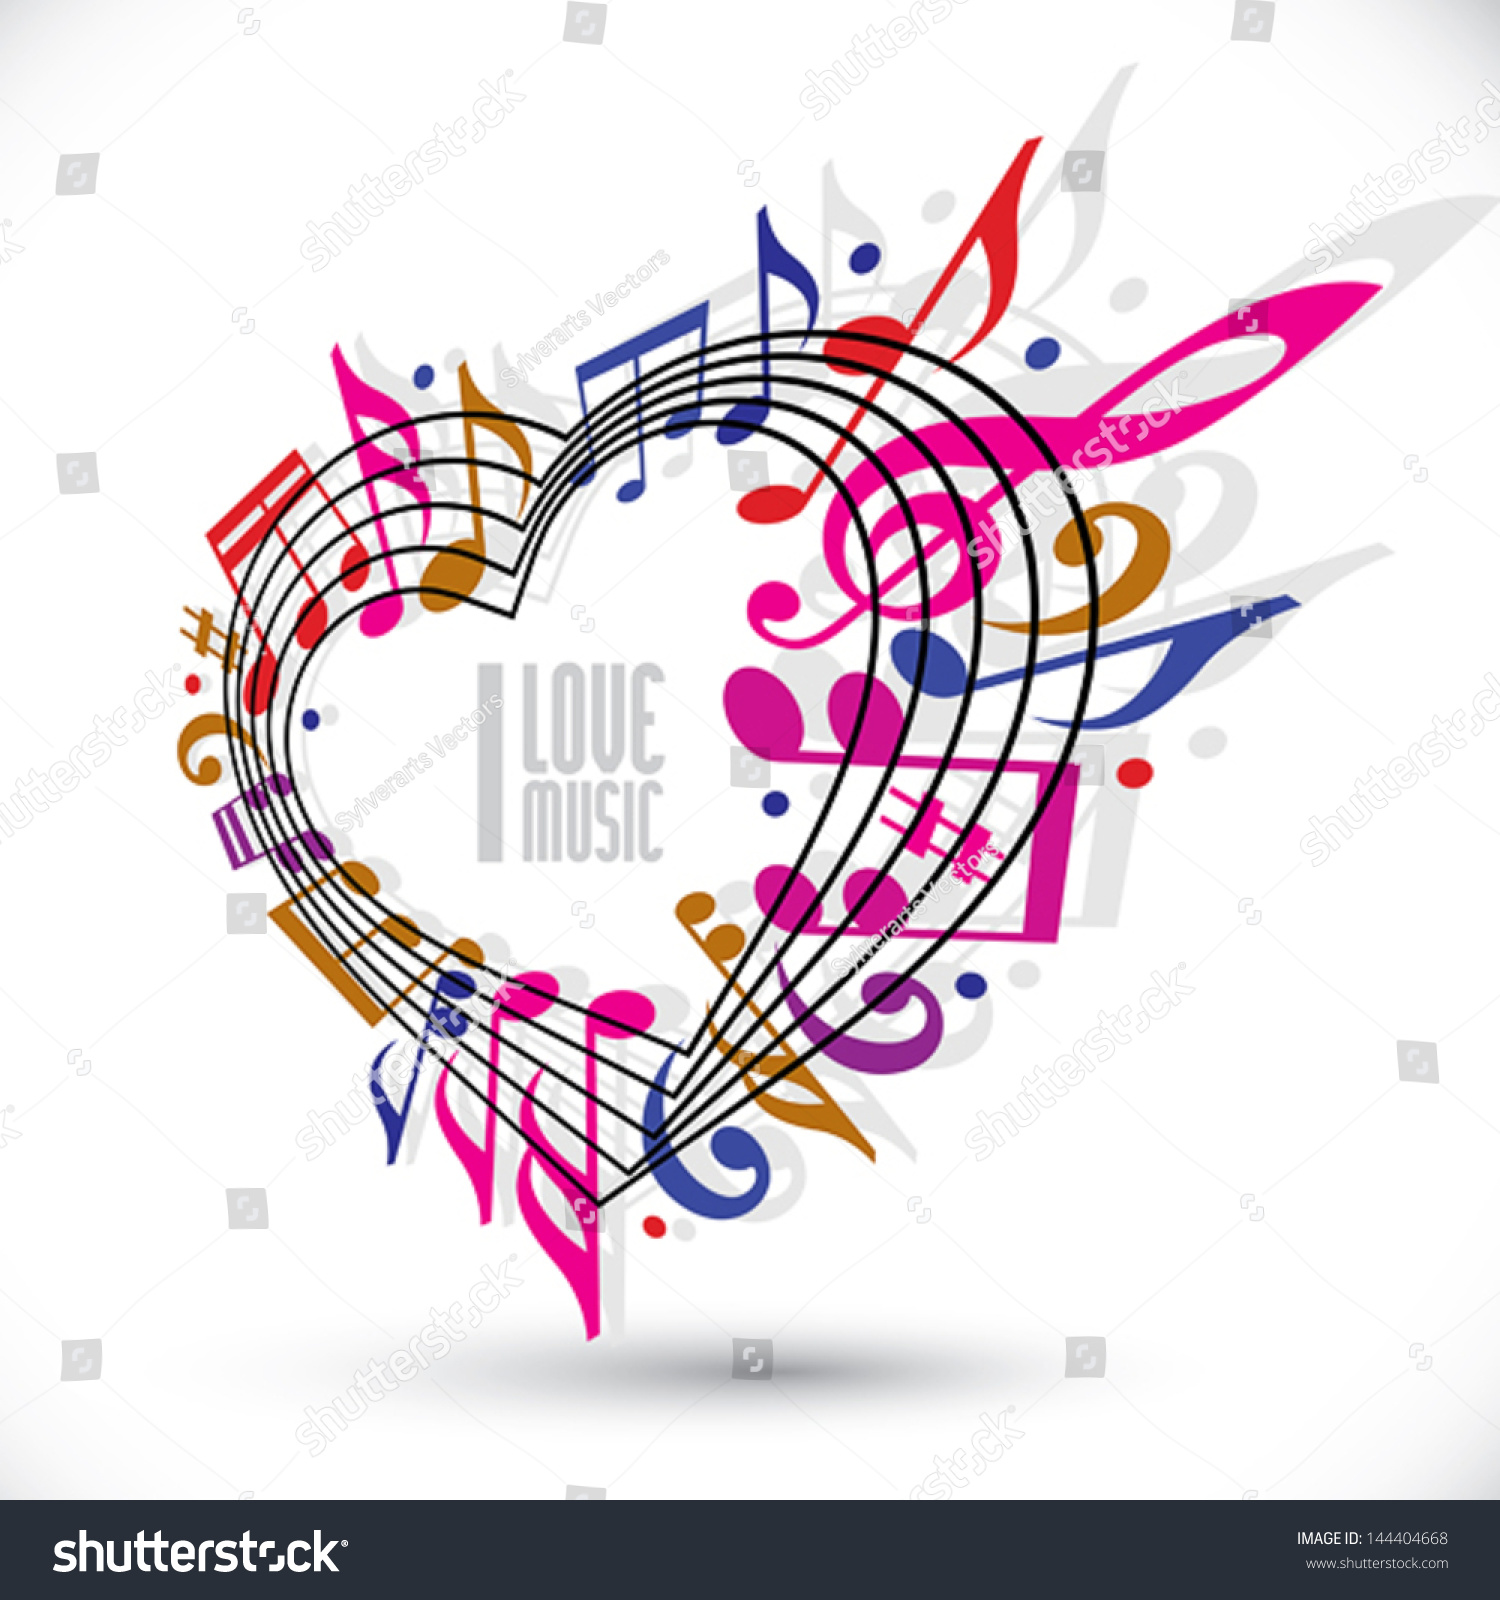 stock-vector-i-love-music-template-in-red-pink-and-violet-colors-rotated-in-d-heart-made-with-musical-notes-144404668.jpg